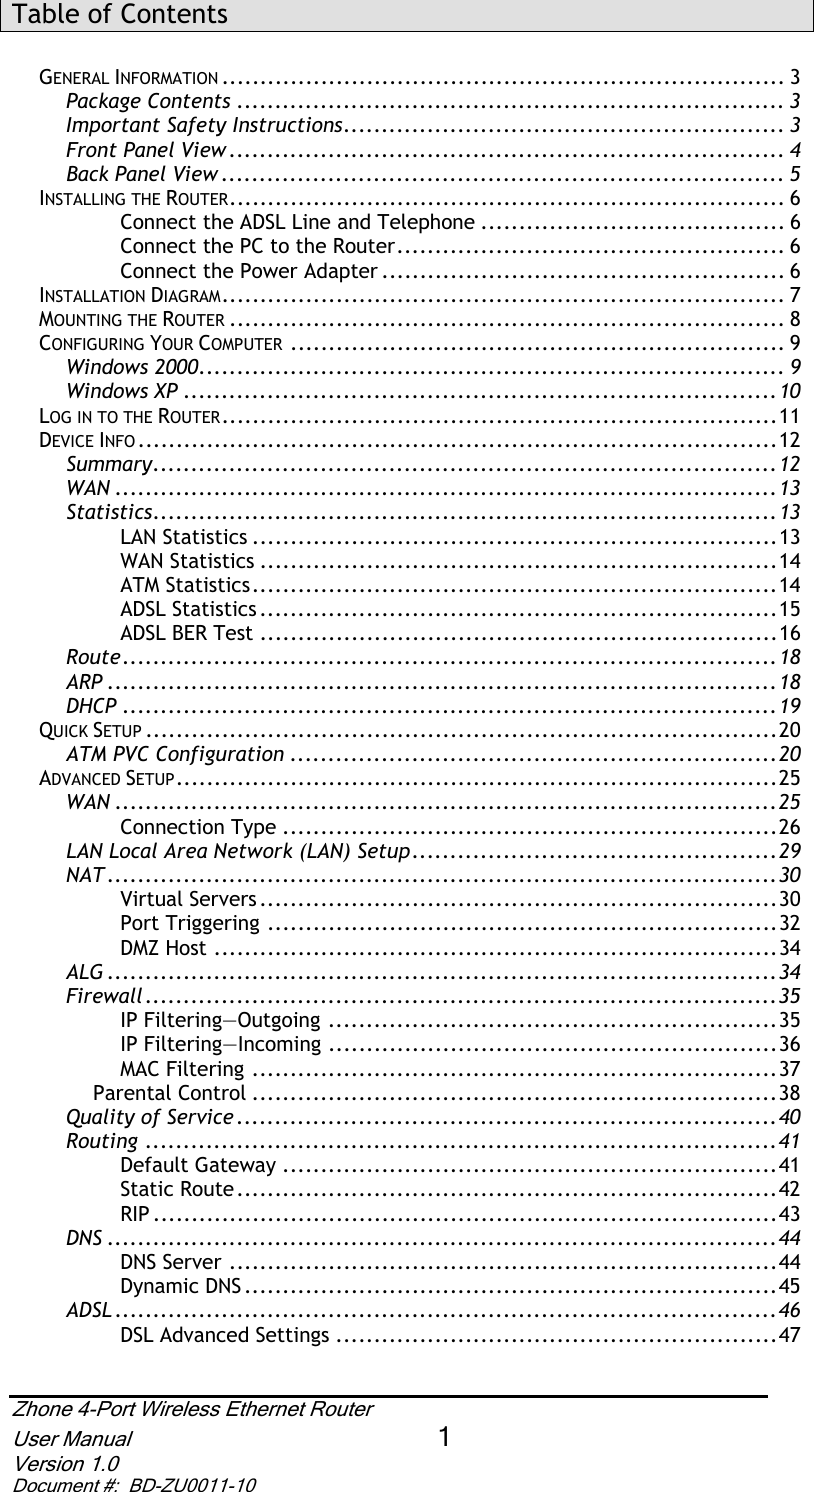 Zhone 4-Port Wireless Ethernet Router User Manual 1Version 1.0 Document #:  BD-ZU0011-10Table of Contents GENERAL INFORMATION .......................................................................... 3 Package Contents ........................................................................ 3Important Safety Instructions.......................................................... 3Front Panel View ......................................................................... 4Back Panel View .......................................................................... 5INSTALLING THE ROUTER......................................................................... 6 Connect the ADSL Line and Telephone ........................................ 6 Connect the PC to the Router................................................... 6 Connect the Power Adapter ..................................................... 6 INSTALLATION DIAGRAM.......................................................................... 7 MOUNTING THE ROUTER ......................................................................... 8 CONFIGURING YOUR COMPUTER ................................................................. 9 Windows 2000............................................................................. 9Windows XP ..............................................................................10LOG IN TO THE ROUTER.........................................................................11 DEVICE INFO ....................................................................................12 Summary..................................................................................12WAN .......................................................................................13Statistics..................................................................................13LAN Statistics .....................................................................13 WAN Statistics ....................................................................14 ATM Statistics.....................................................................14 ADSL Statistics ....................................................................15 ADSL BER Test ....................................................................16 Route......................................................................................18ARP ........................................................................................18DHCP ......................................................................................19QUICK SETUP ...................................................................................20 ATM PVC Configuration ................................................................20ADVANCED SETUP...............................................................................25 WAN .......................................................................................25Connection Type .................................................................26 LAN Local Area Network (LAN) Setup................................................29NAT ........................................................................................30Virtual Servers ....................................................................30 Port Triggering ...................................................................32 DMZ Host ..........................................................................34 ALG ........................................................................................34Firewall...................................................................................35IP Filtering—Outgoing ...........................................................35 IP Filtering—Incoming ...........................................................36 MAC Filtering .....................................................................37 Parental Control .....................................................................38 Quality of Service .......................................................................40Routing ...................................................................................41Default Gateway .................................................................41 Static Route.......................................................................42 RIP ..................................................................................43 DNS ........................................................................................44DNS Server ........................................................................44 Dynamic DNS ......................................................................45 ADSL .......................................................................................46DSL Advanced Settings ..........................................................47 